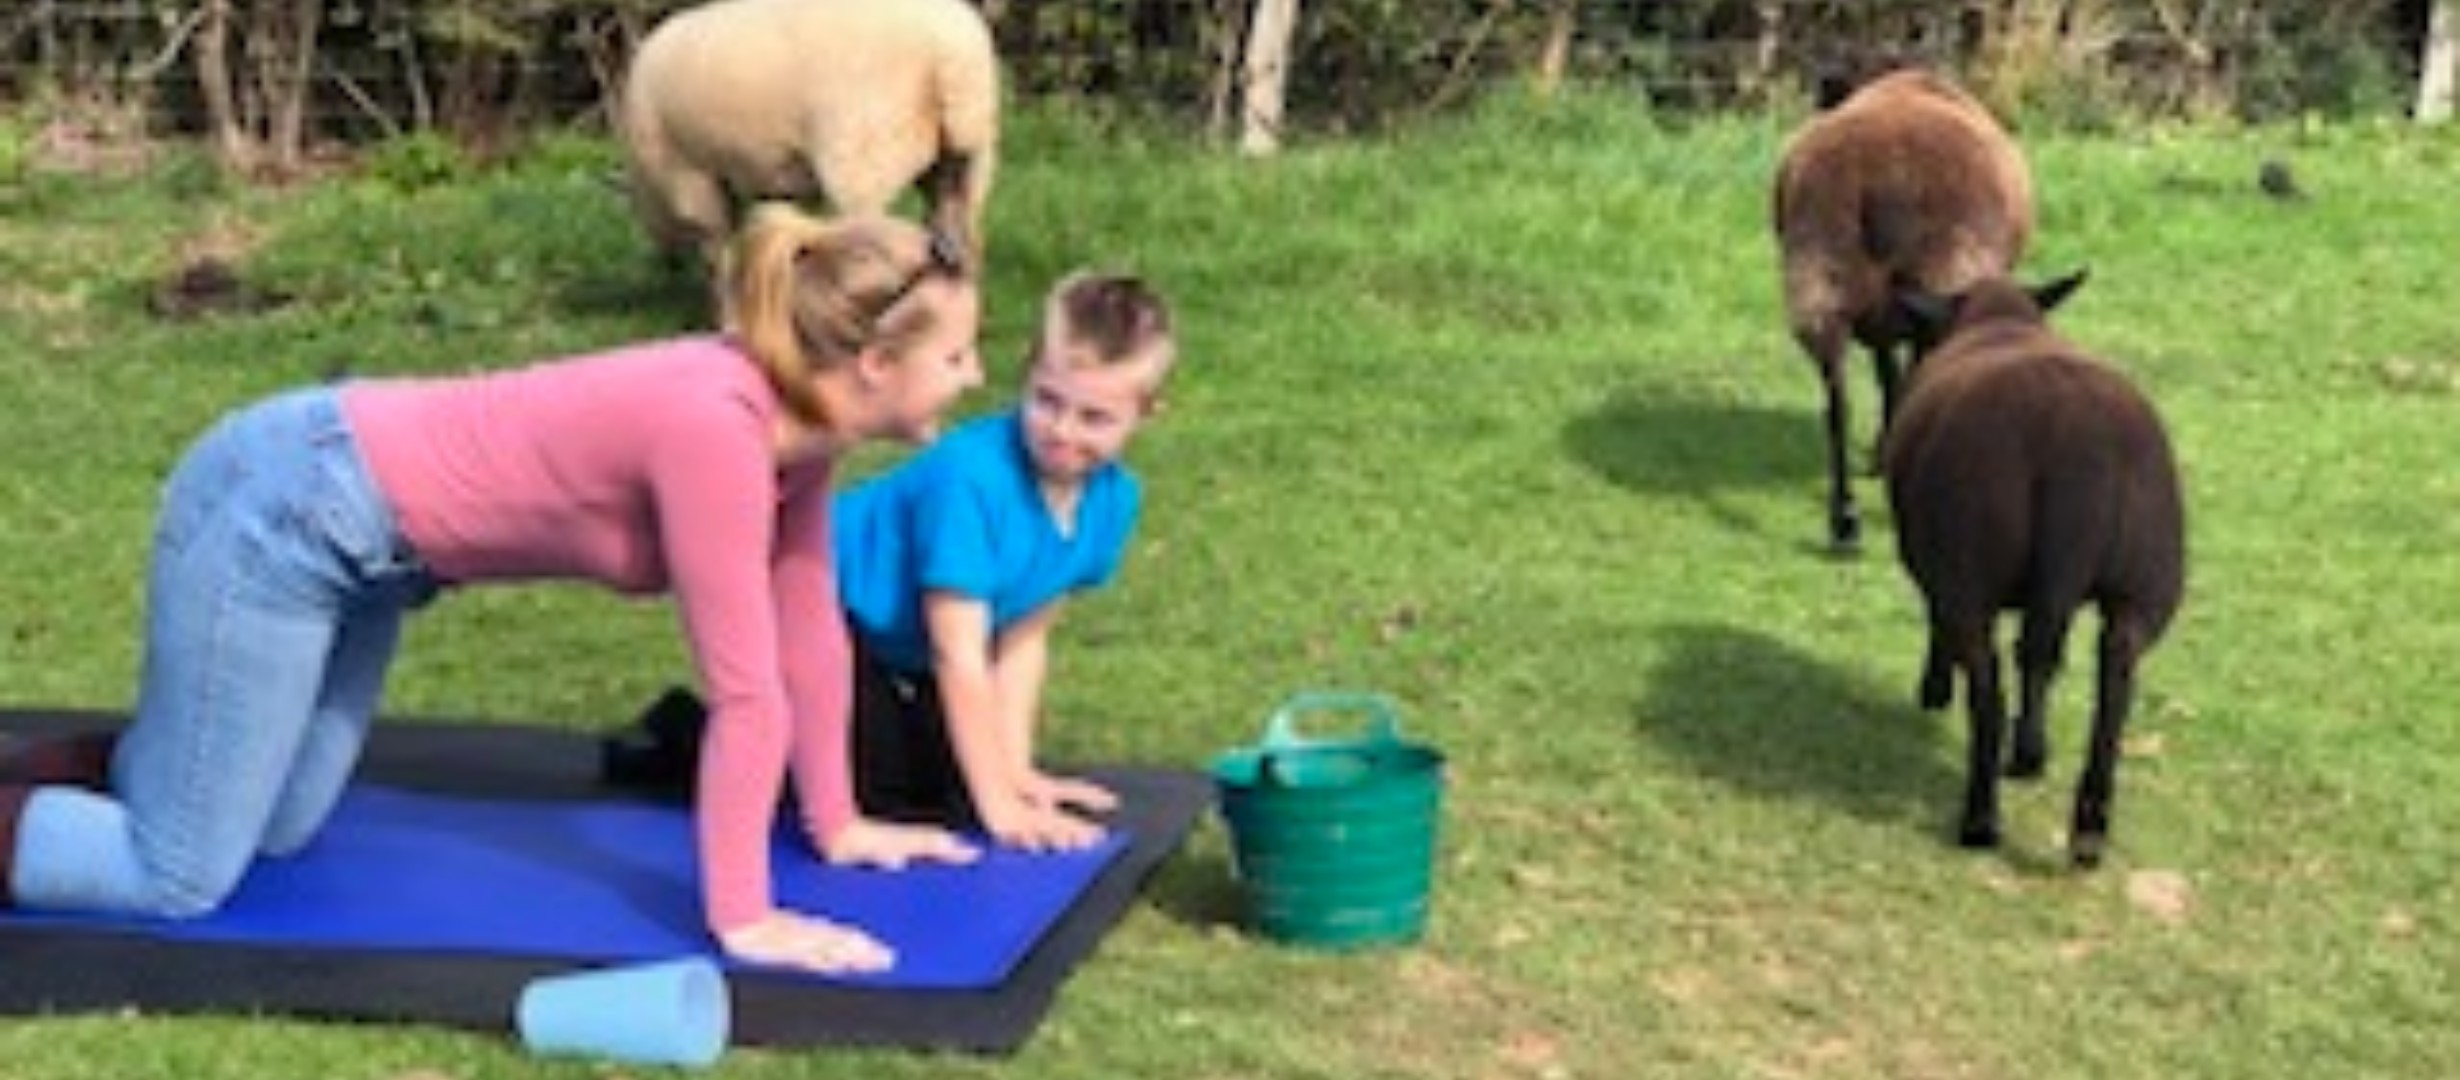 An adult and child on all fours on a yoga mat in a field surrounded by two black sheep and one white sheep